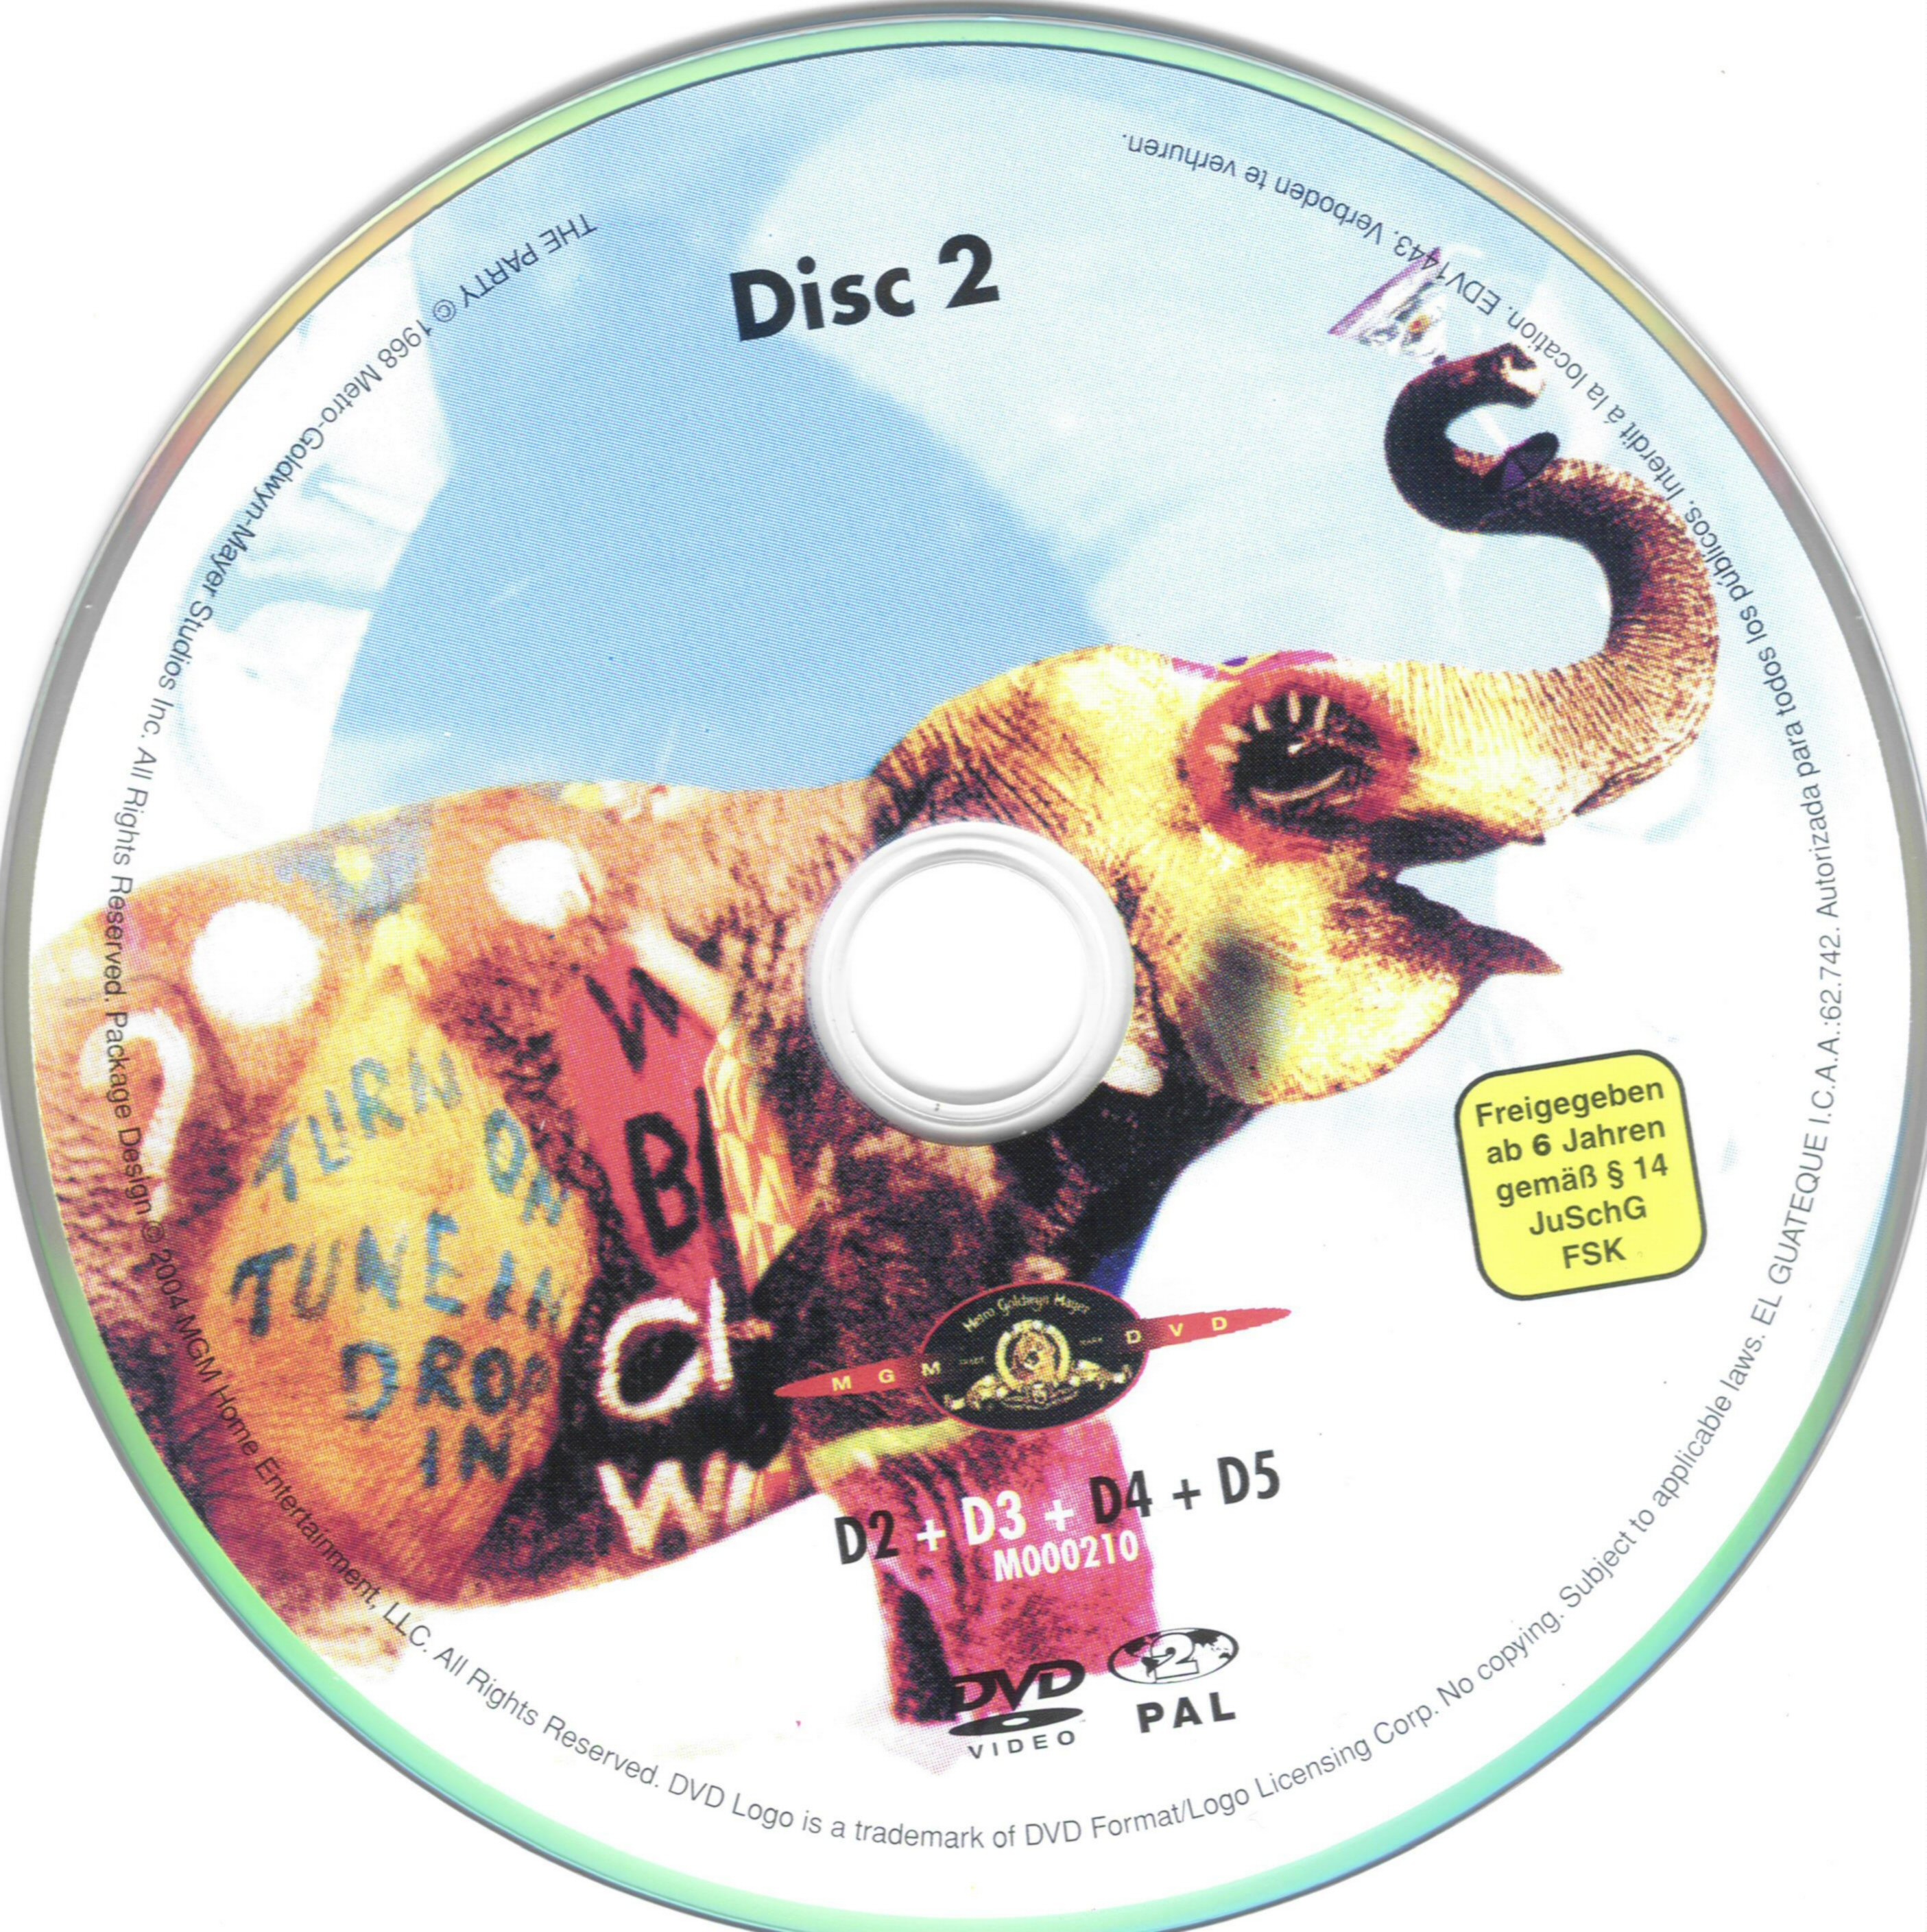 The party DISC 2